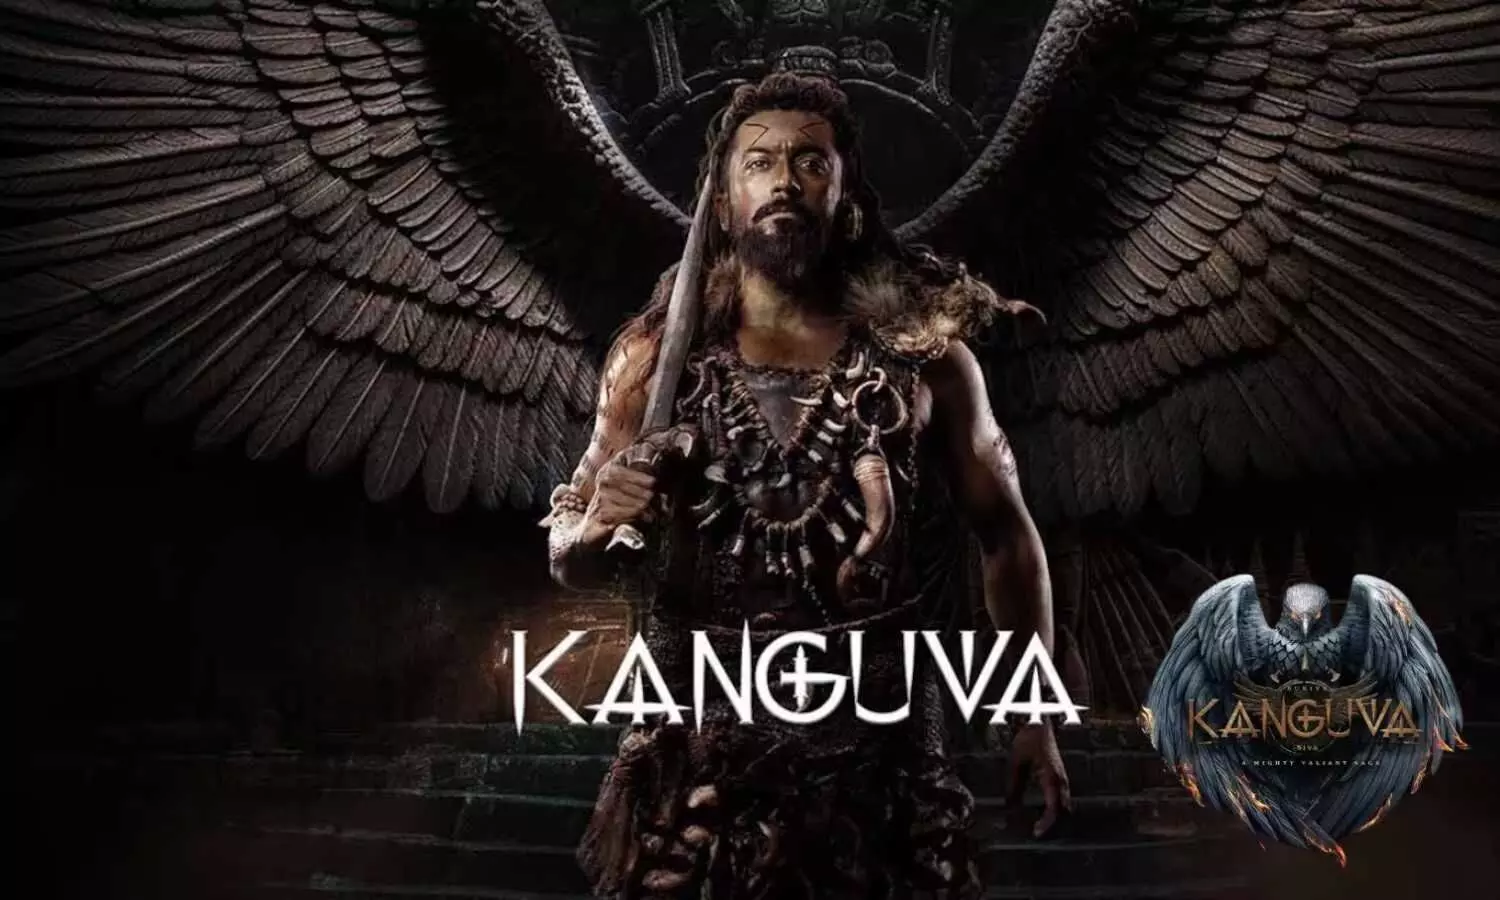 Did Suryas ‘Kanguva’ Secure a Rs. 25 Crore Deal for Telugu Theatrical Rights?